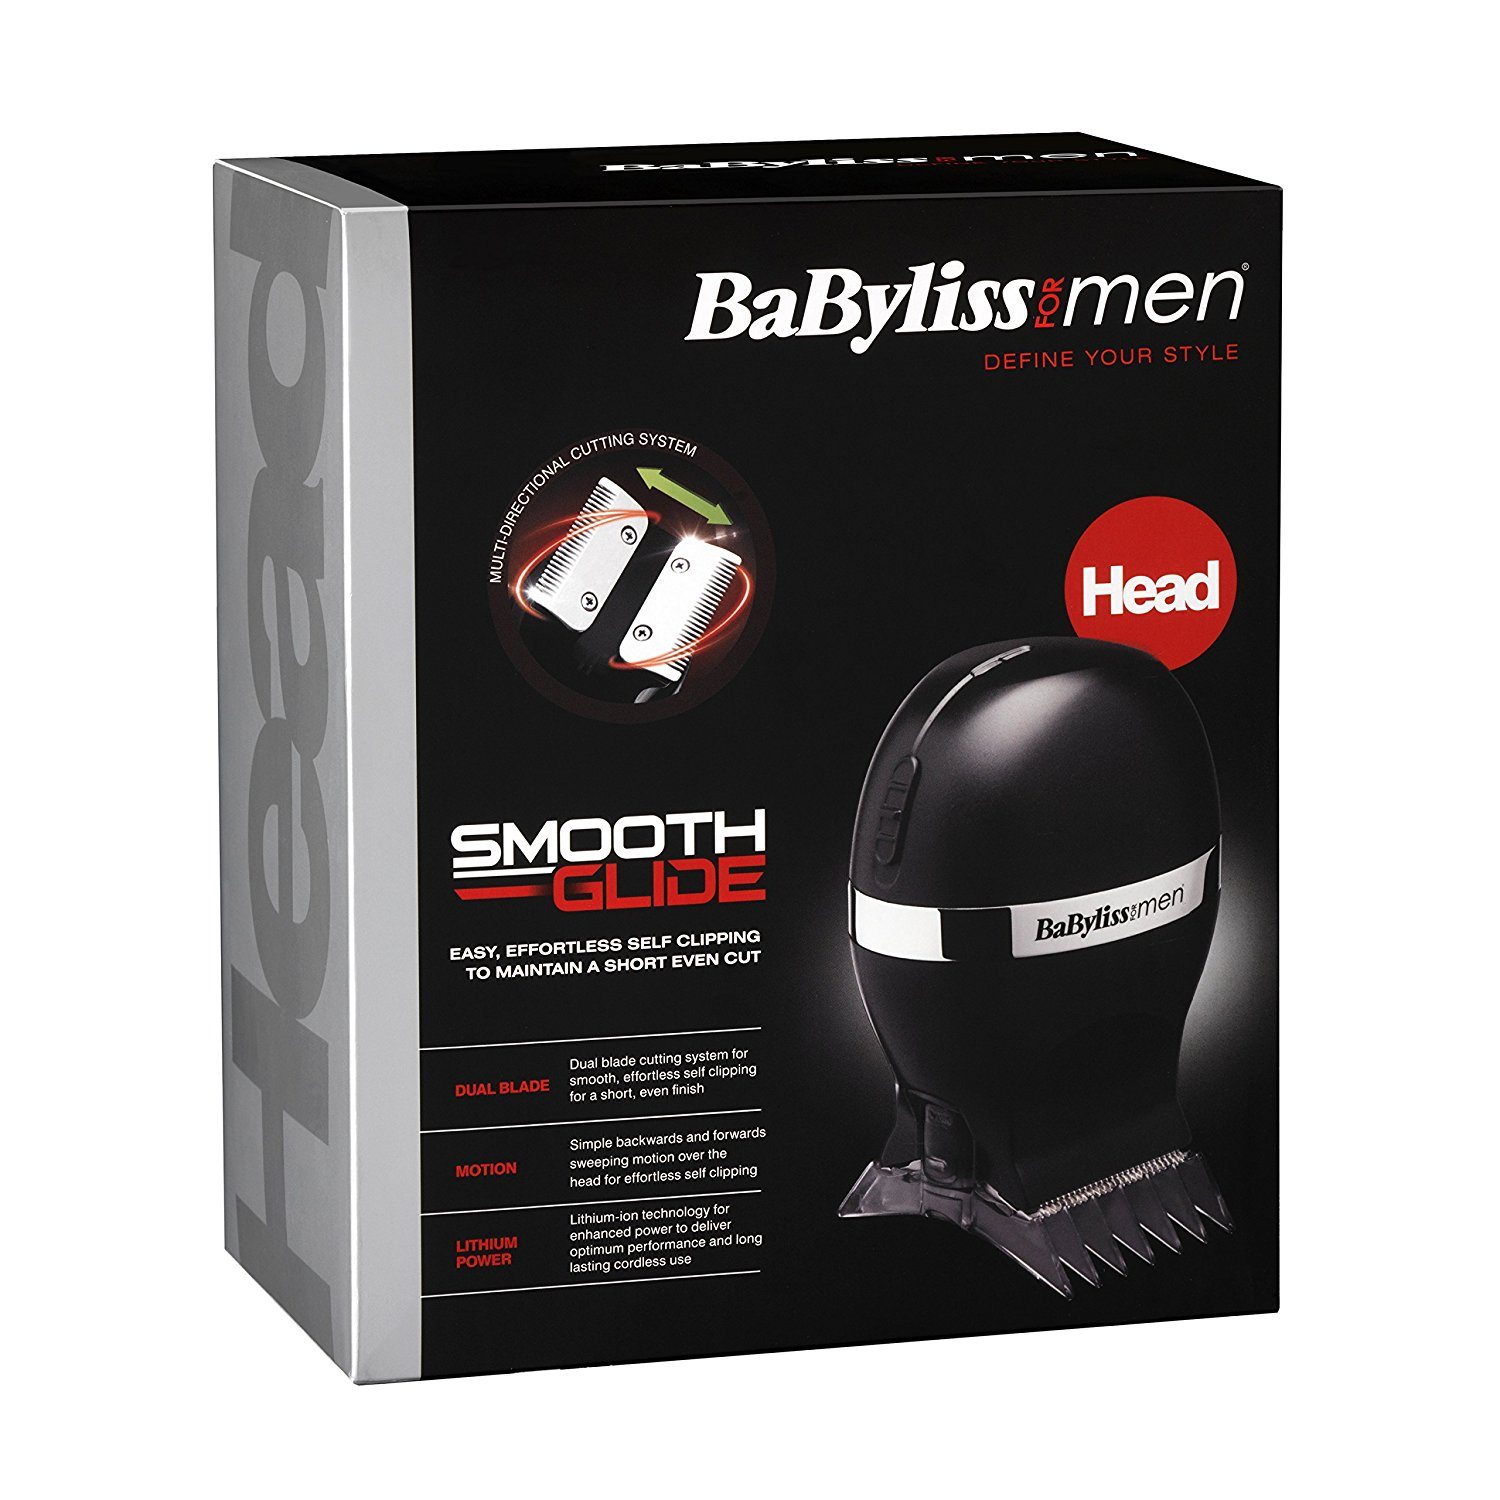 babyliss Smooth Glide in box